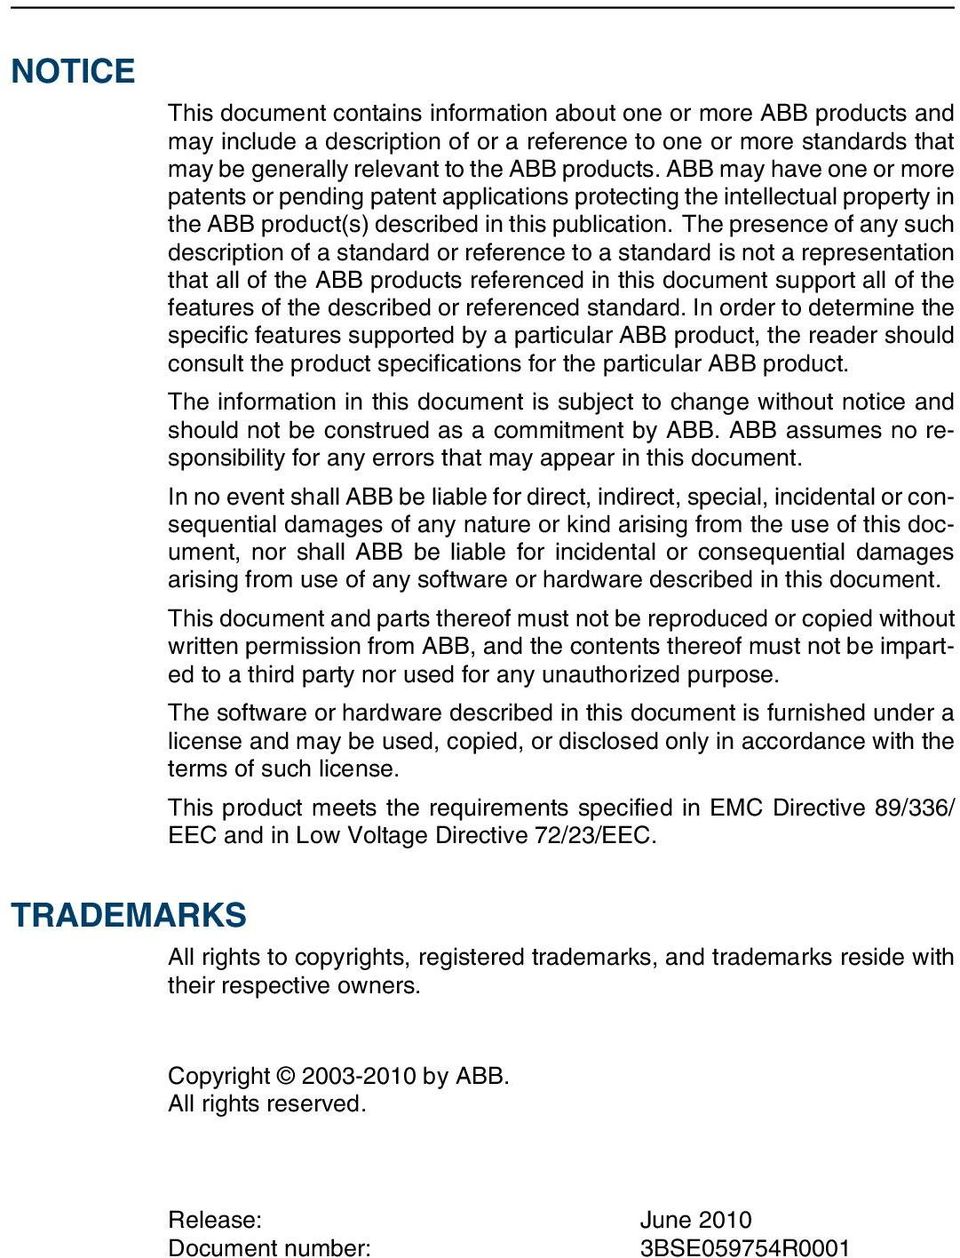 The presence of any such description of a standard or reference to a standard is not a representation that all of the ABB products referenced in this document support all of the features of the